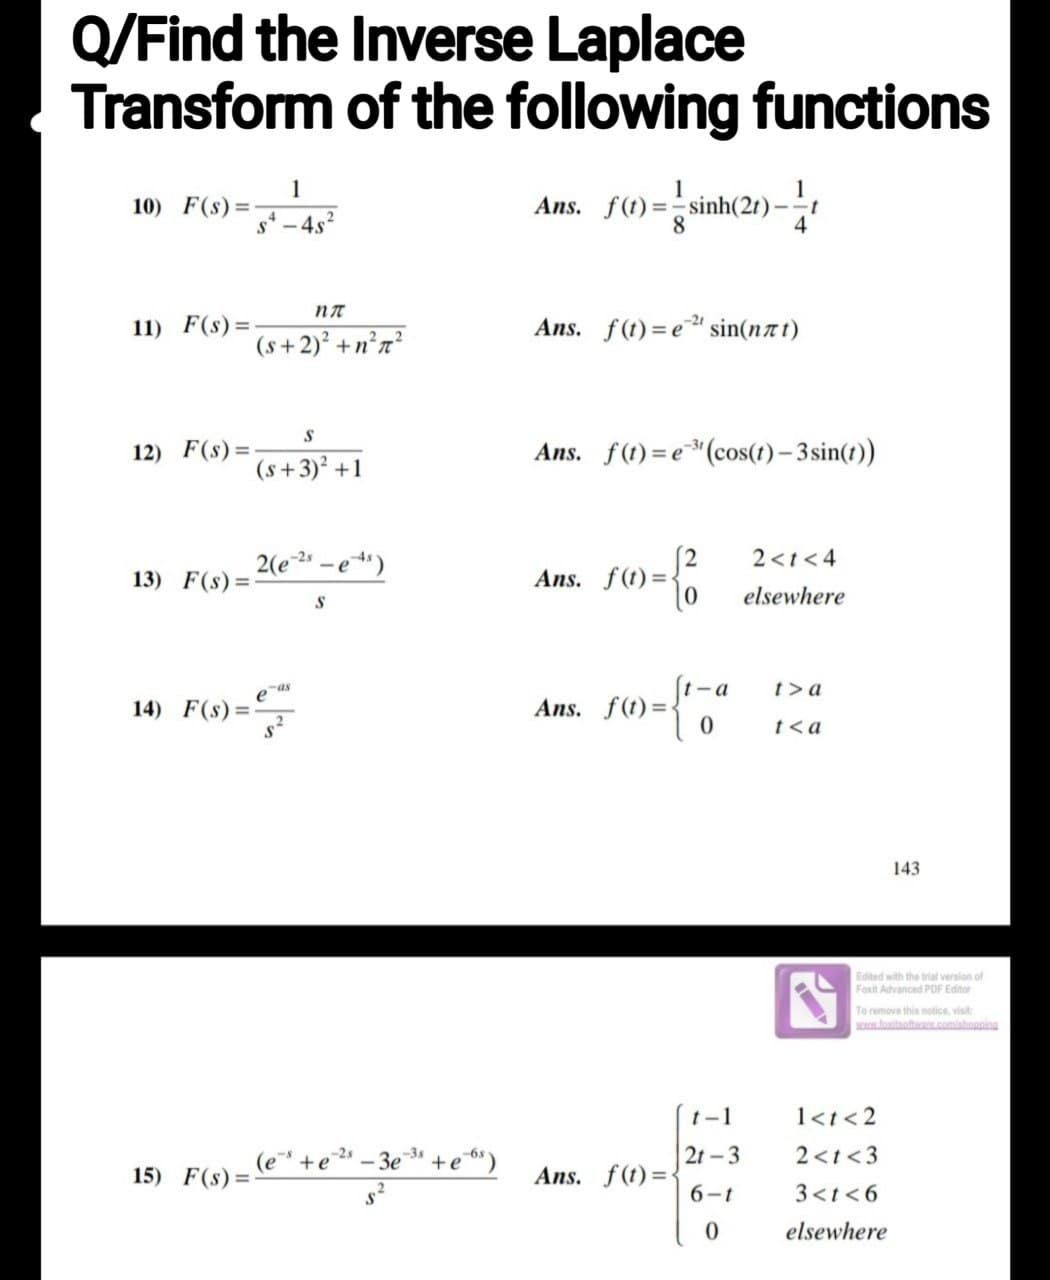 Q/Find the Inverse Laplace
Transform of the following functions
Ans. f()=-sinh(20)--
10) F(s)=-
11) F(s) =
1
S-4s²
(s+2)² +n²r²
12) F(s)=-
15) F(s) =
S
(s+3)² +1
2(e-2s
13) F(s)=-
na
-as
14) F(s) =
s) ==
-e-4²)
S
(e+e-²-3e-³s +e6s)
Ans. f(t)= e sin(not)
Ans. f(t)=e³¹(cos(t)-3 sin(t))
Ans. f(t)=<
f(1) = {²
Ans. f(t)=
Ans. f(t)=
t-a
4
0
t-1
2t-3
6-t
0
2<t<4
elsewhere
t>a
t<a
143
Edited with the trial version of
Foxit Advanced PDF Editor
To remove this notice, visit:
www.foxitsoftware.com/shopping
1<t <2
2<t <3
3<t<6
elsewhere